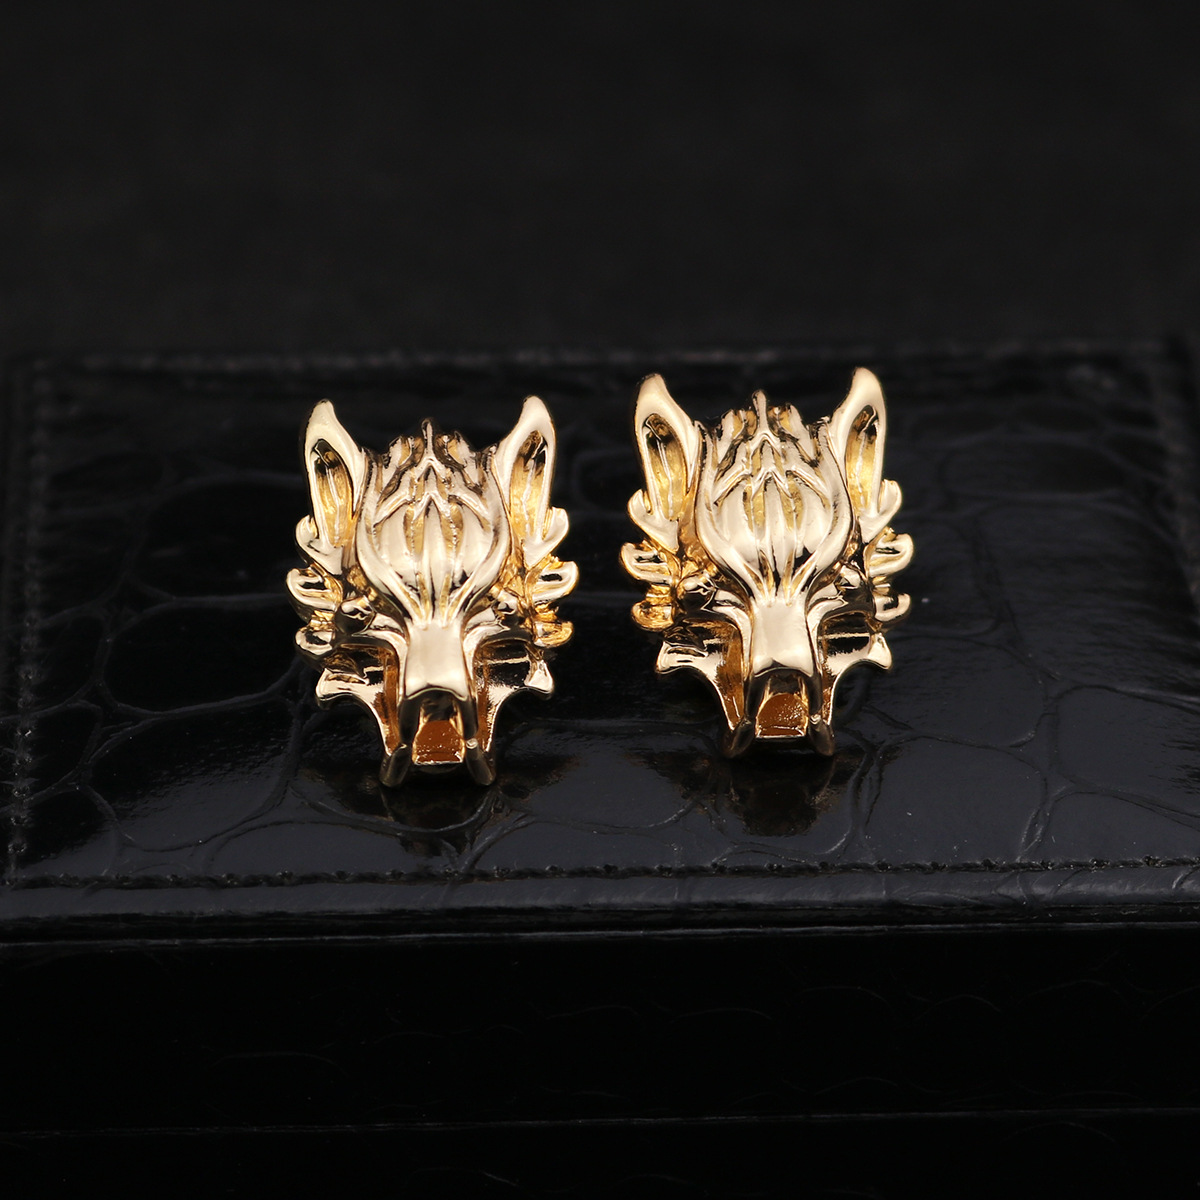 1 Pair Personality Fashion Alloy Wolf Shape Men's Women's Metal Long Chain Tassel Brooch Pin Unisex Shirt Collar Lapel Pins Brooches Gift Jewelry Shirt Studs